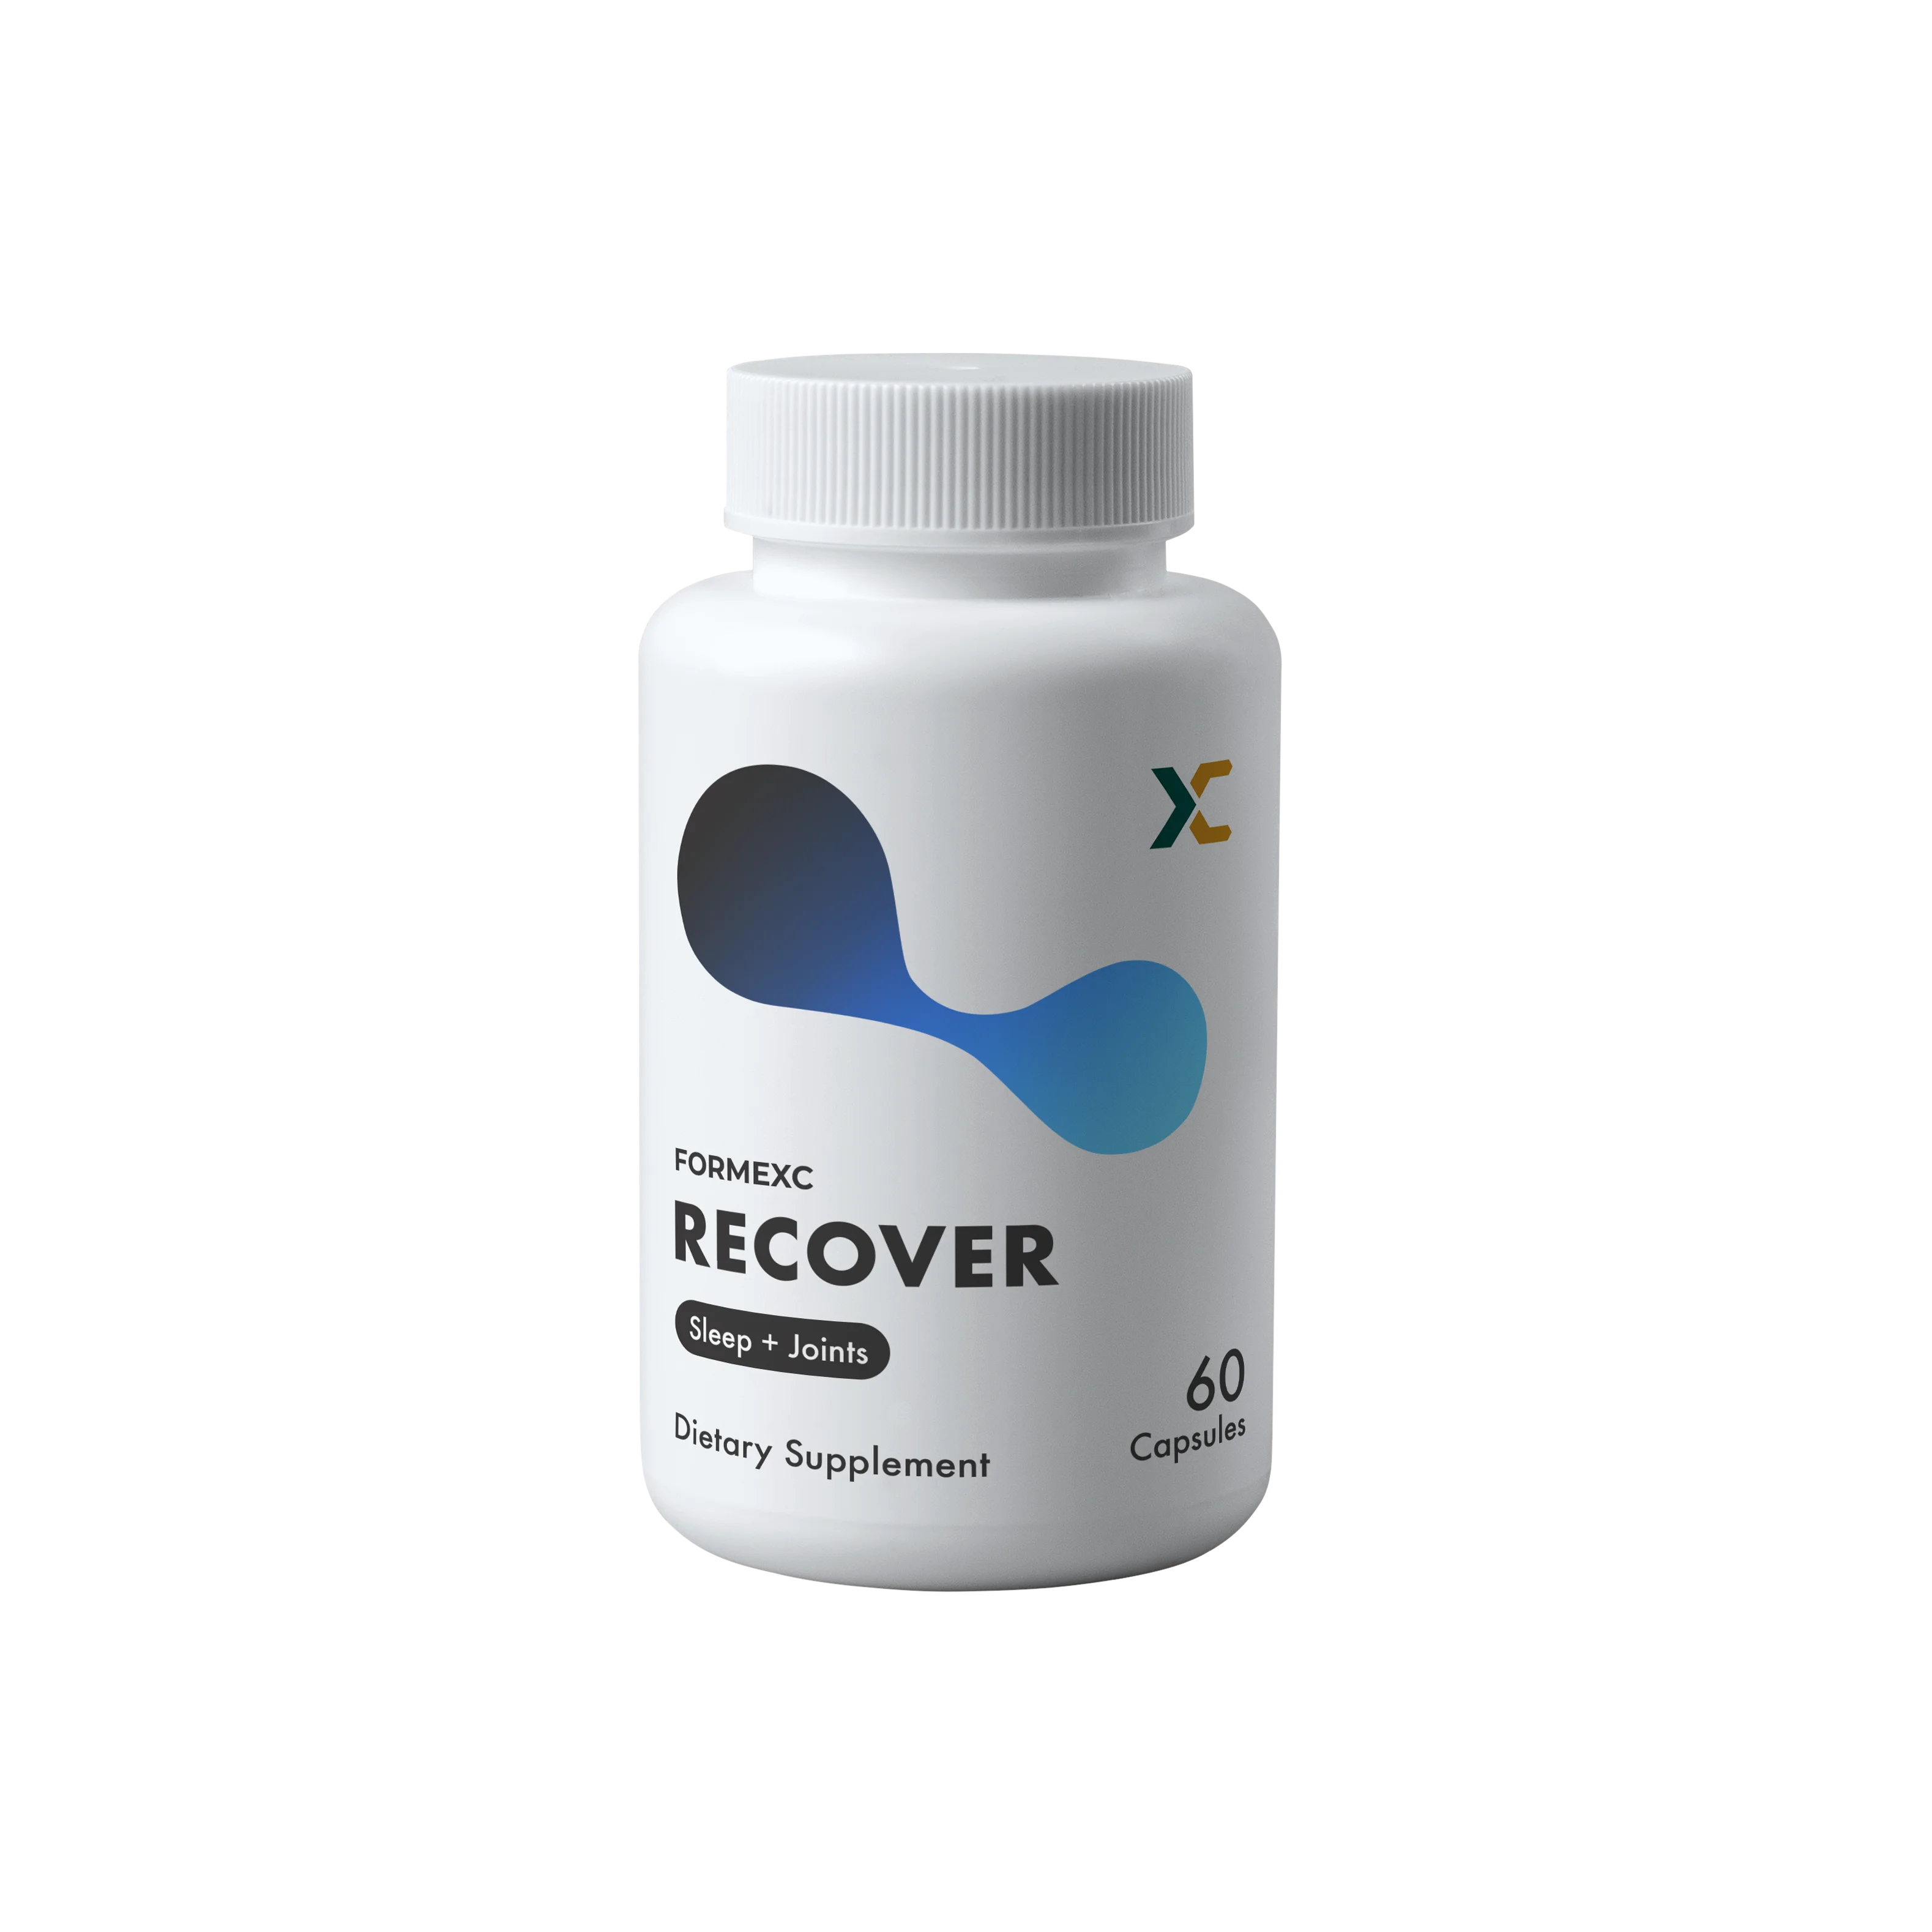 Formexc RECOVER is a natural food supplement for sleep and recovery. 